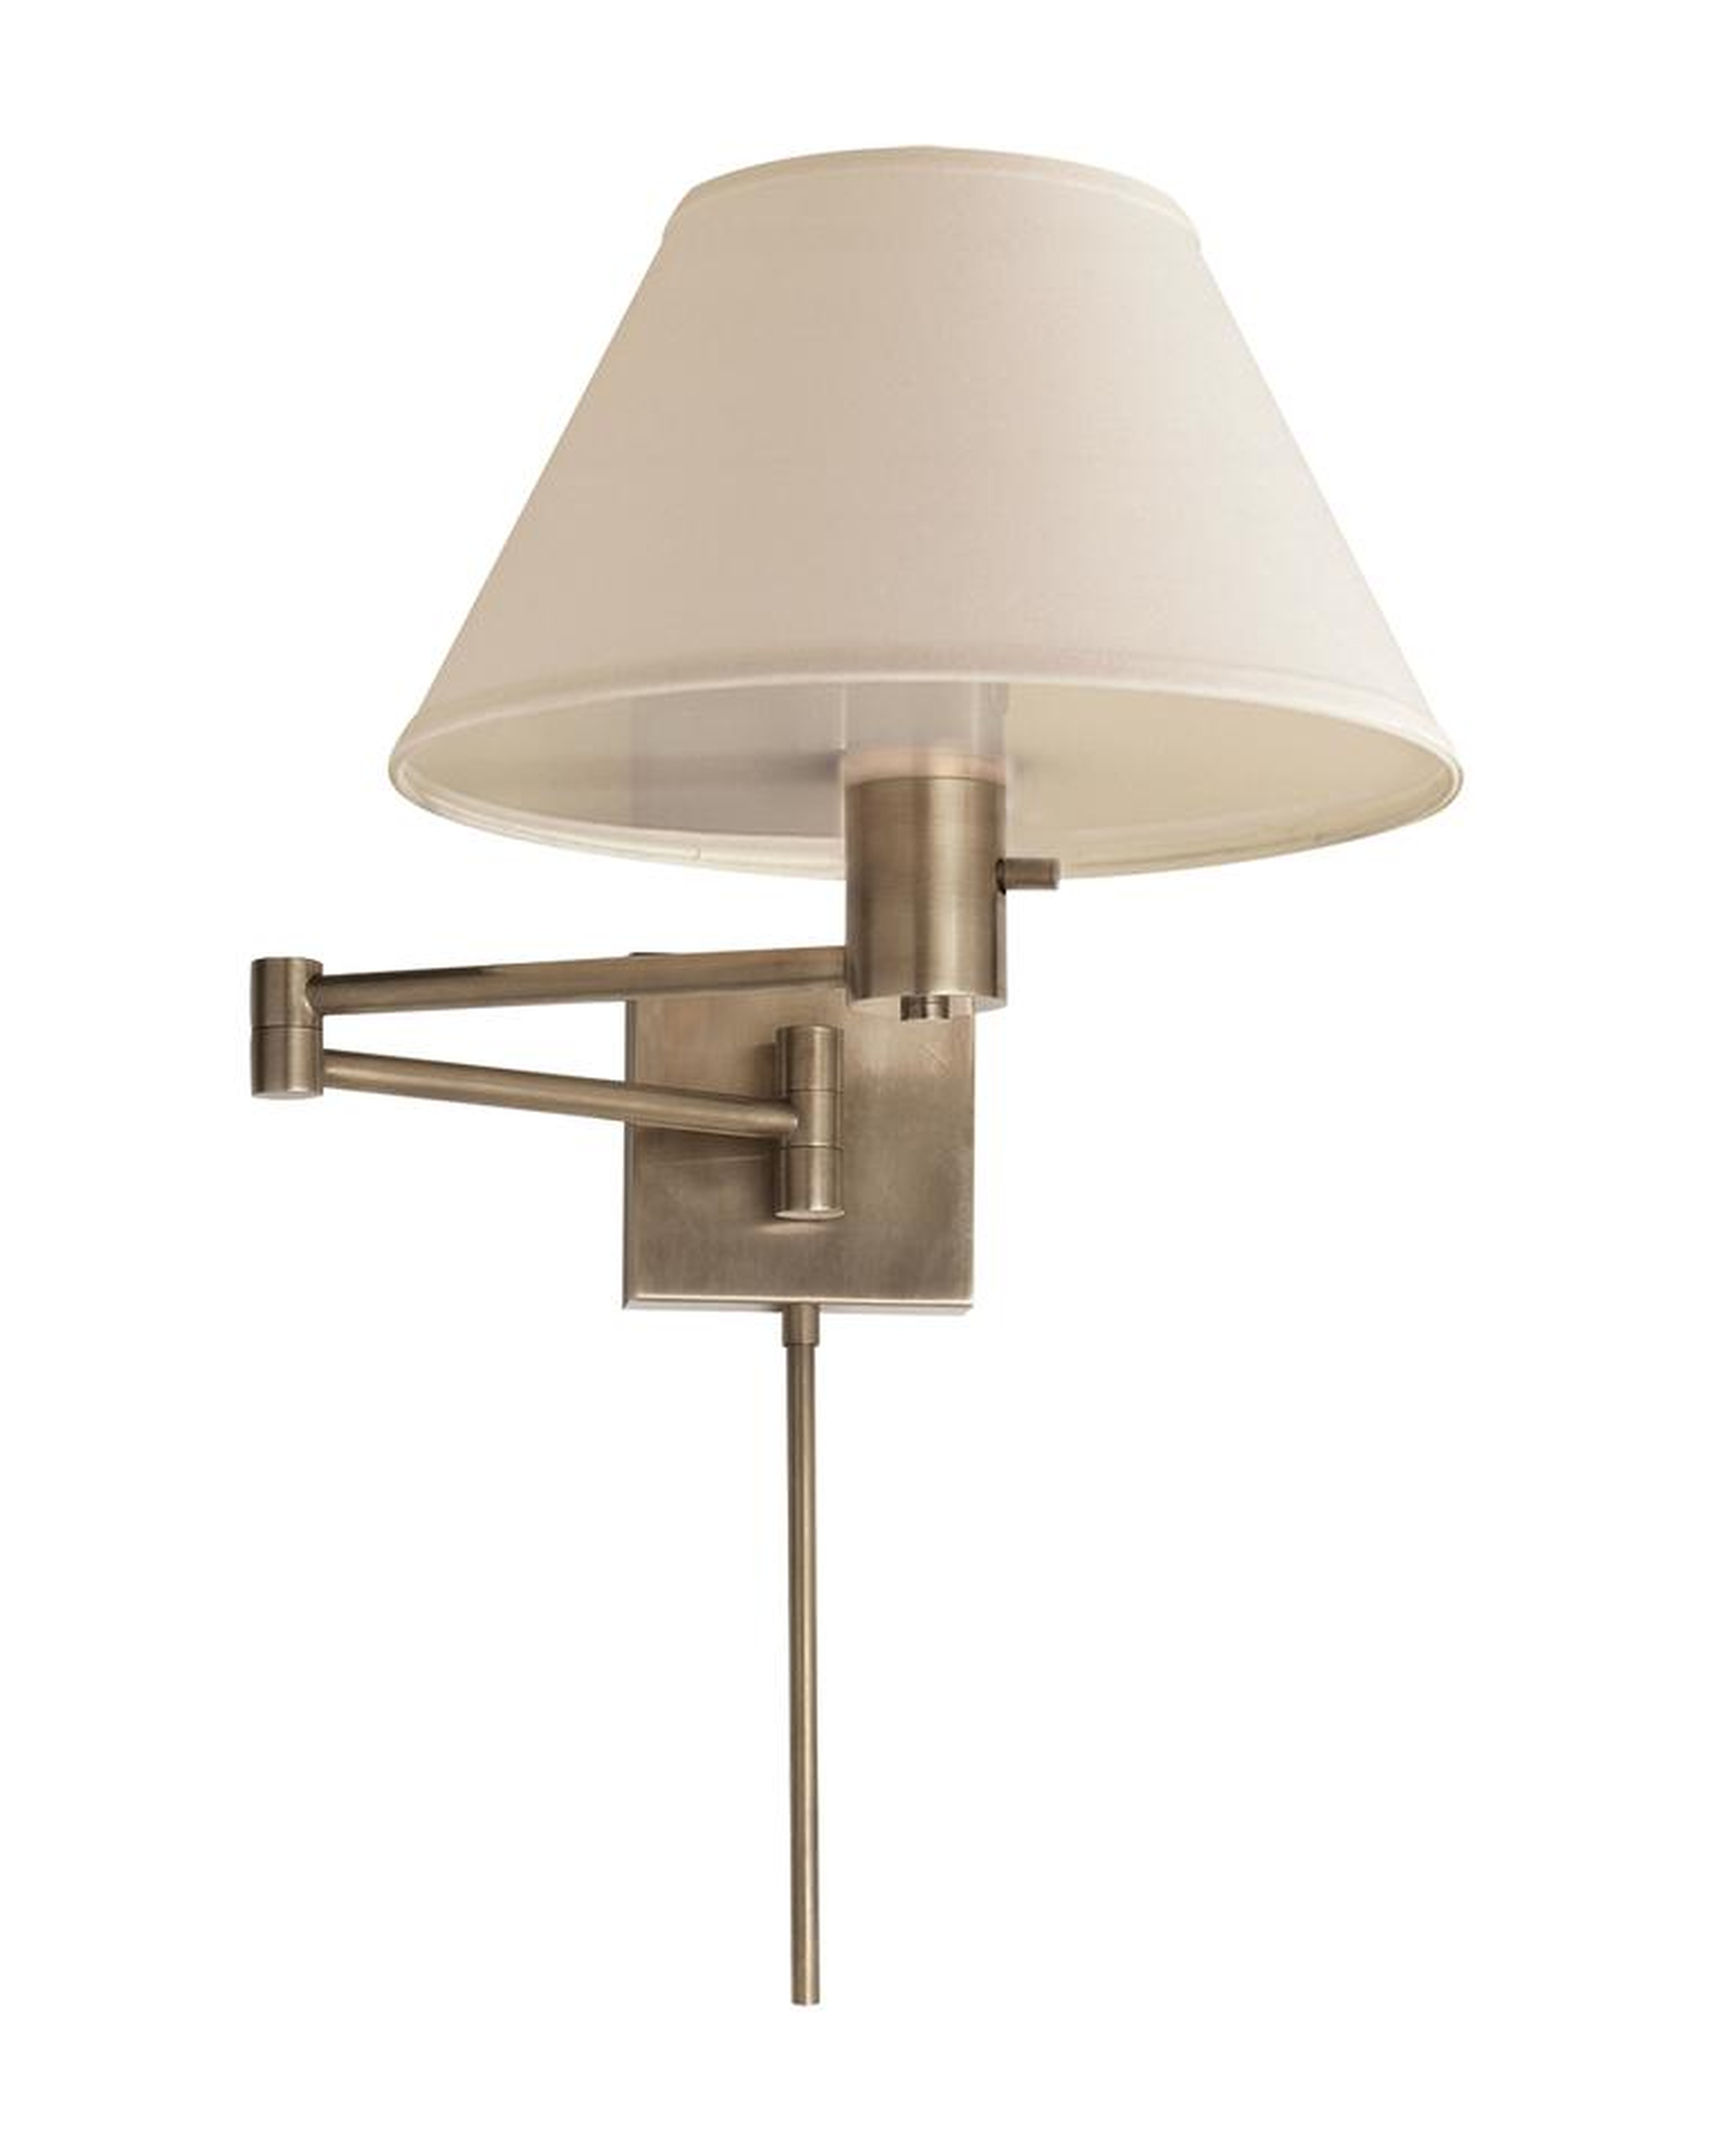 CLASSIC SWING ARM WALL LAMP - ANTIQUE NICKEL - McGee & Co.